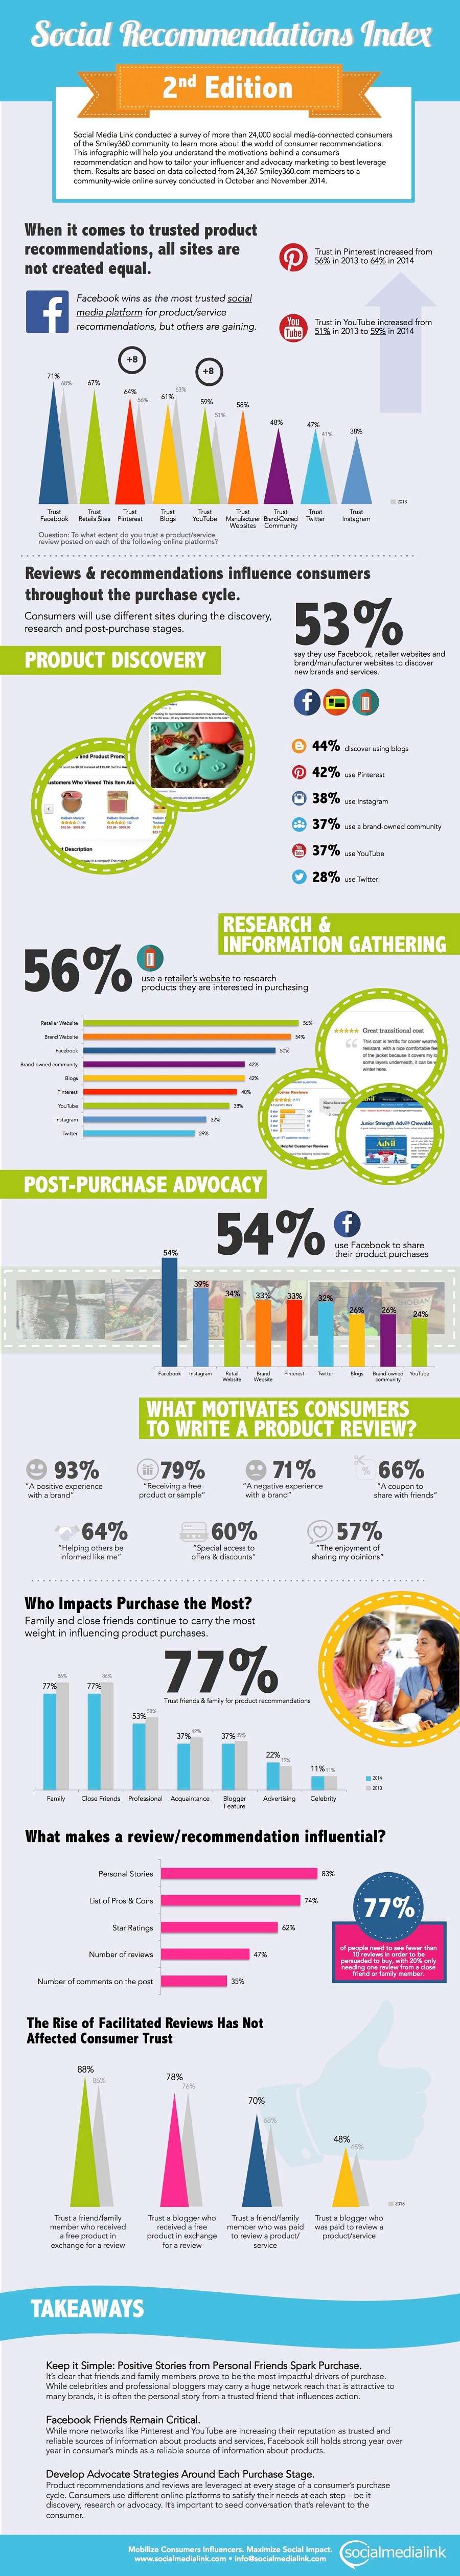 Social Recommendations Index 2nd Edition - Social Media Link conducted a survey of more than 24,000 social media-connected consumers of the Smiley360 community to learn more about the world of consumer recommendations. This infographic will help you understand the rnotivations behind a consumei, recommendation and how to tailor your influencer and advocacy marketing to best leverage them. Results are based on data collected from 24,367 Smiley360.com members to a cornmunity-wide online survey conducted in October and November 2014. 
When it comes to trusted product recommendations, ali sites are not created equal. 
71% 
Facebook wins as the most trusted social media platform for product/service recommendations, but others are gaining. 
Trust in Pinterest increased from Sb% in 2013 toãÀ in 2014 
Trust in YouTube increased from 51% in 2013 to 2?2:£ in 2014 
Trust p, rnrt:st Blogs 
YouTube ManTUfuasctturer Bra=led 1[1j:1j:riam Websites Cornmunity 
2r:JjzsTt:f2,,tee:árrál%Yfooi-iict,r,,-isntga.Pnwrideu,Vastrrir,c,:, 
2013 
Reviews & recommendations influente consumers throughout the purchase cycle. Consumers will use different sites during the discovery, research and post-purchase stages. 
PRODUC OVERY 
4)/56 o use a retailer's website to redsearchrchasing 
3% 
say they use Facebook, retailer websites and brand/manufacturer websites to discover new brands and services. 
oro 
44% discover using blogs e42% use Pinterest O38% use Instagram C) 37% use a brand-owned community 37% use YouTube O28% use Twitter 
RESEARCH & INFORMATION GATHERING 
Brand Website I. 
81ogs 
Pinterest 
YouTube 
29% 
42% 
42% 
40% 
38% 
56% 54% 50% 
Great transibonal coat 
rfr 
POST-PURCHASE ADVOCACY 
54% 
54% 
use Facebook to share their product purchases 
WHAT MOTIVATES CONSUMERS TO WRITE A PRODUCT REVIEW? 
93% ir 79% 71% 
A positive experiente Receiving a free AirJ2 bn negativa veexperience with a brand product or sample w 
64% be fe2 Ir'rregcl itln 
66% A °,ce,z7r,t:nds„ 
60% 5 7 TO Special access to The enjoyment of 
offers & discounts 
Who Impacts Purchase the Most? Family and Glose friends continue to carry the most weight in influencing product purchases. 
77% 77% 
53% 
77% 
Trust friends 8, family for product recommendations 
37% 
Family Close Friends Professional Acquaintance 
37%3'. 
egat2Z 
22%,, 
Advertising 
11% 
Celebrity 
2014 .13 
What makes a review/recommendation influential? 
Personal Stories List of Pros & Cons 74% Star Ratings 62% Number of reviews 47% Number of comments on the post 35% 
The Rise of Facilitated Reviews Has Not Affected Consumer Trust 
88% 
Trust a friend/family member who received a free product in exchange for e review 
78% 76% Trust a blogger who Trust a friend/family received a free member who was paid product in exchange to review a product/ for a review service 
70% 
68% 
48% 45% 
Trust a blogger who was paid to review a product/service 
3013 
Keep it Simple: Positive Stories from Personal Friends Spark Purchase. It's clear that friends and family members prove to be the most impactful drivers of purchase. While celebrities and professional bloggers may carry e huge network reach that is attractive to many brands, it is often the personal story from a trusted friend that influentes action. 
Facebook Friends Remain Criticai. While more networks like Pinterest and YouTube are increasing their reputation as trusted and reliable sources of information ebout products and services, Facebook sfill holds strong year over year in consumer's minds as a reliable source of information ebout products. 
Develop Advocate Strategies Around Each Purchase Stage. Product recommendations and reviews are leveraged at every stage of a consumer% purchase cycle. Consumers use different online platforms to satisfy their needs at each step — be it discovery, research or advocacy. It's important to seed conversation that's relevant to the consumer. 
Mobilize Consumers Influencers. Maximize Social Impact. ealmedialink www.socialmedialink.com • infoesocialmedialink.com